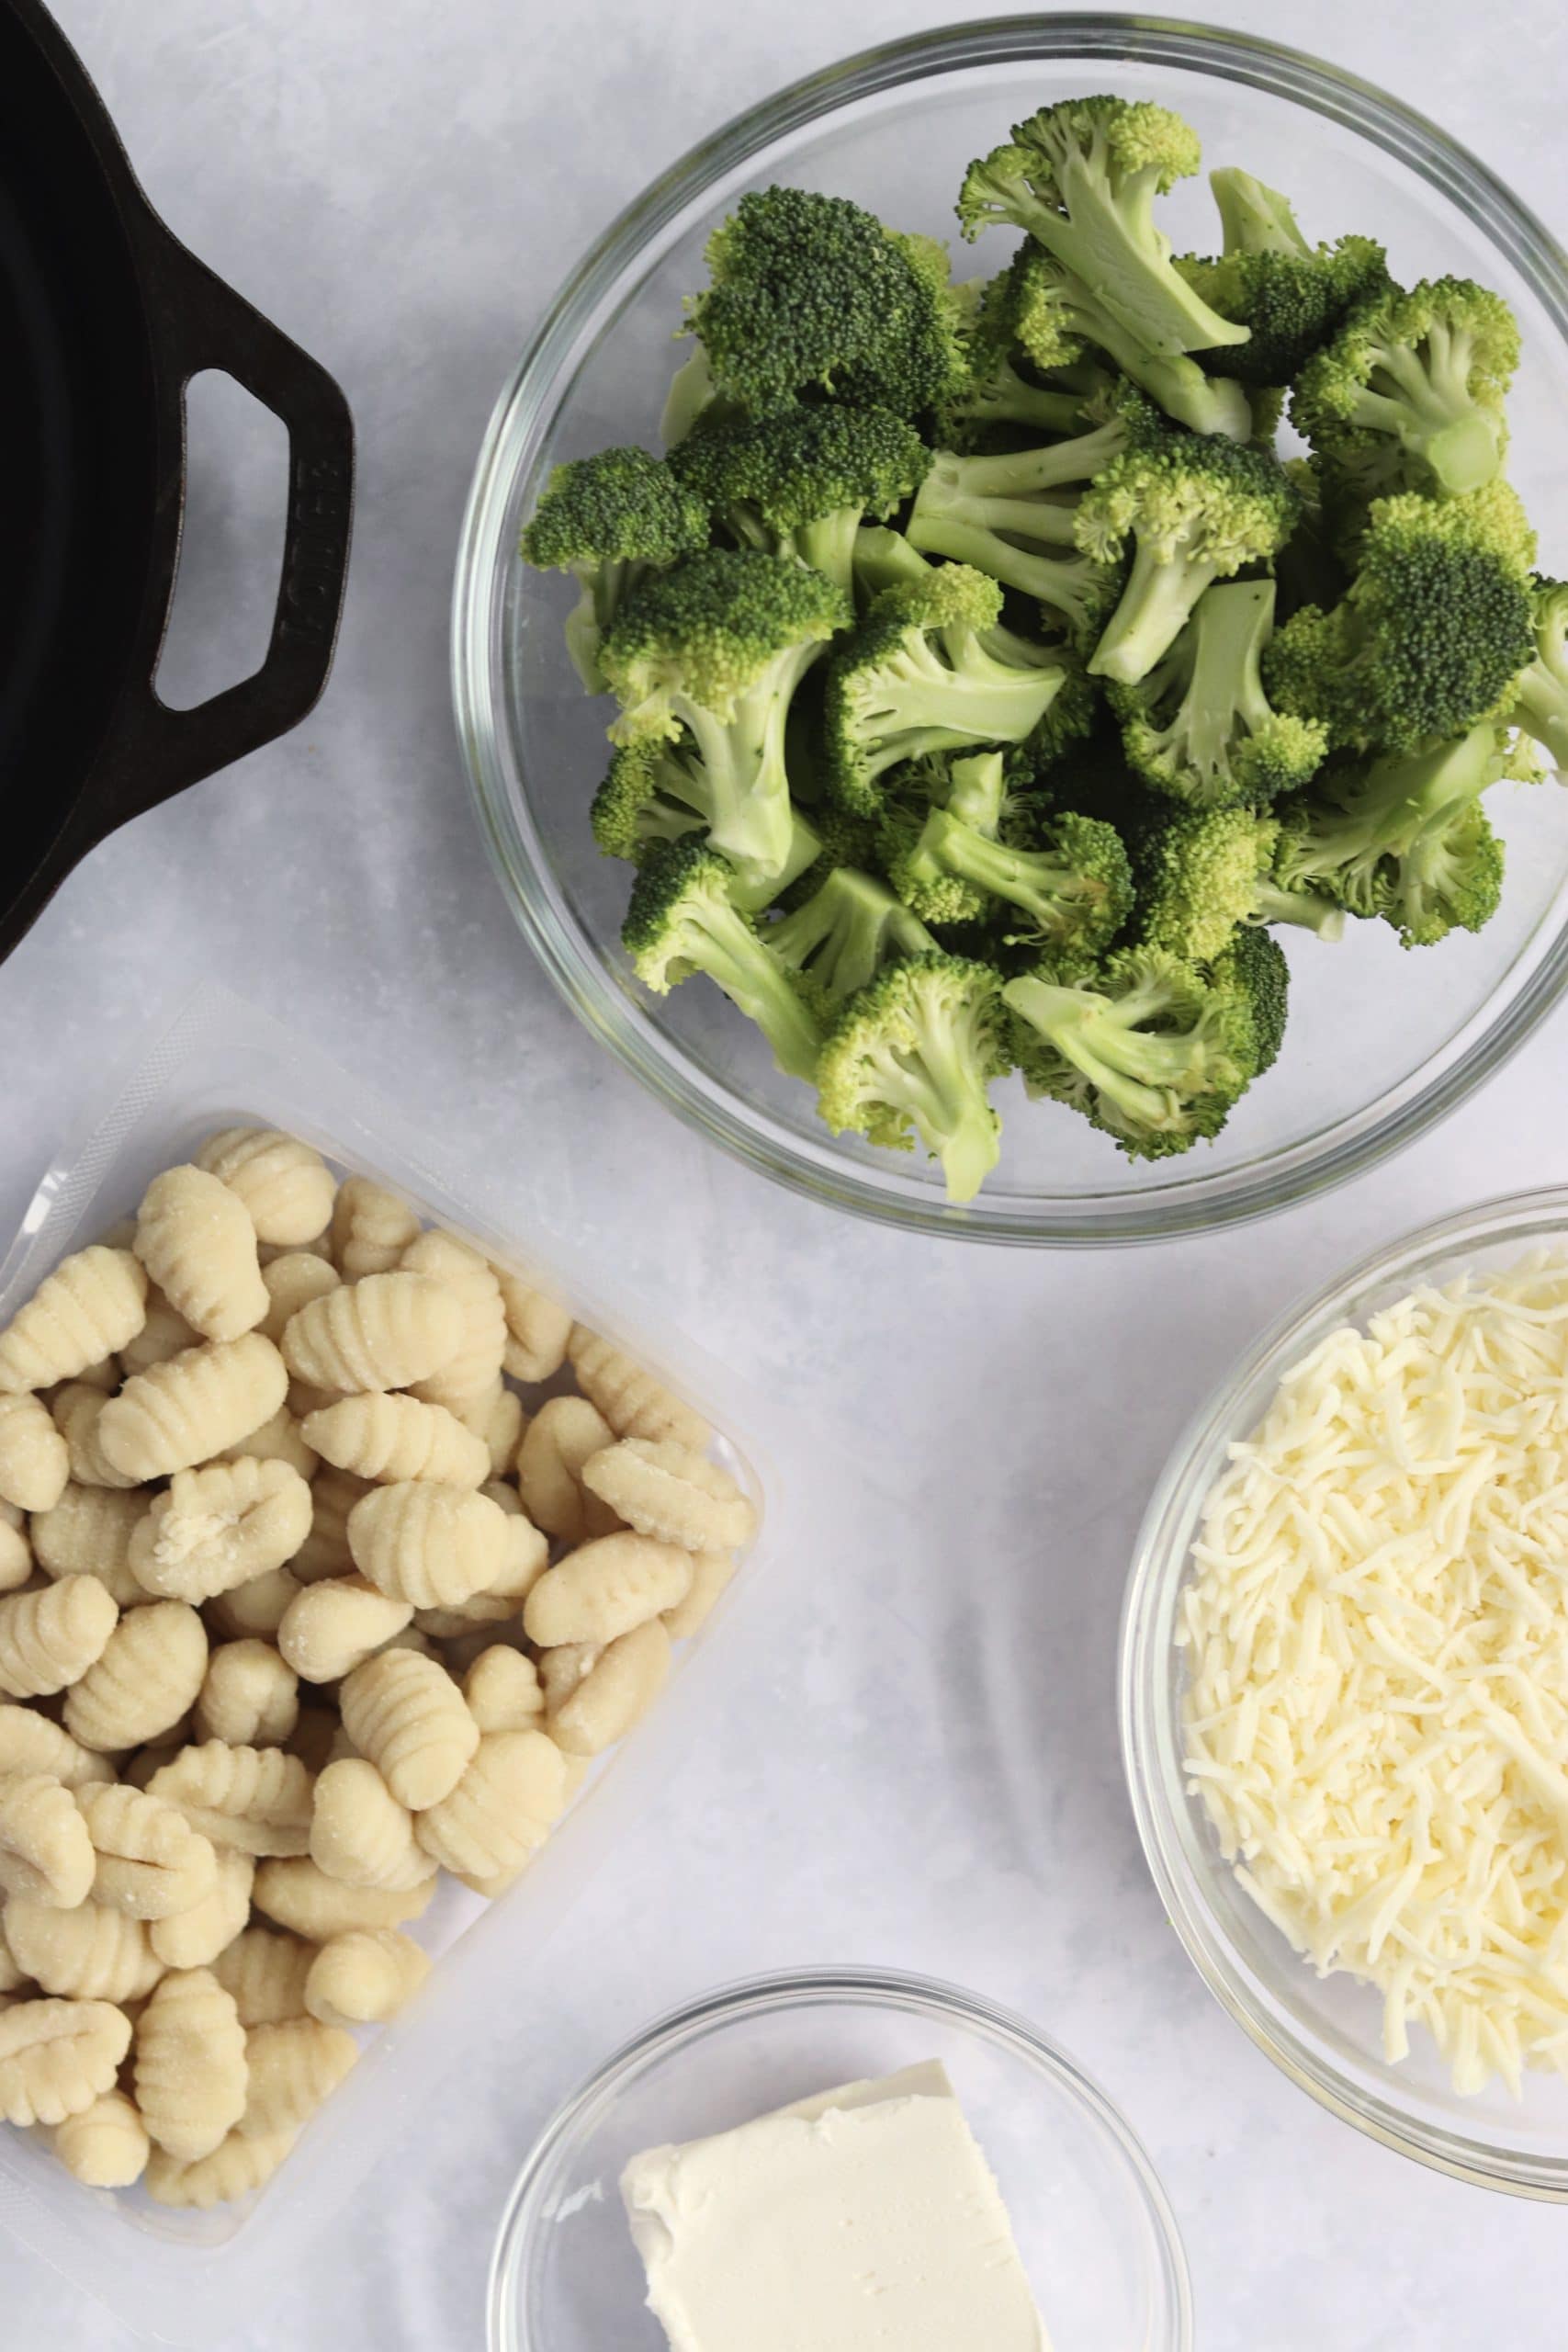 Recipe ingredients in bowls - broccoli florets, store-bought gnocchi, cream cheese, and shredded cheese